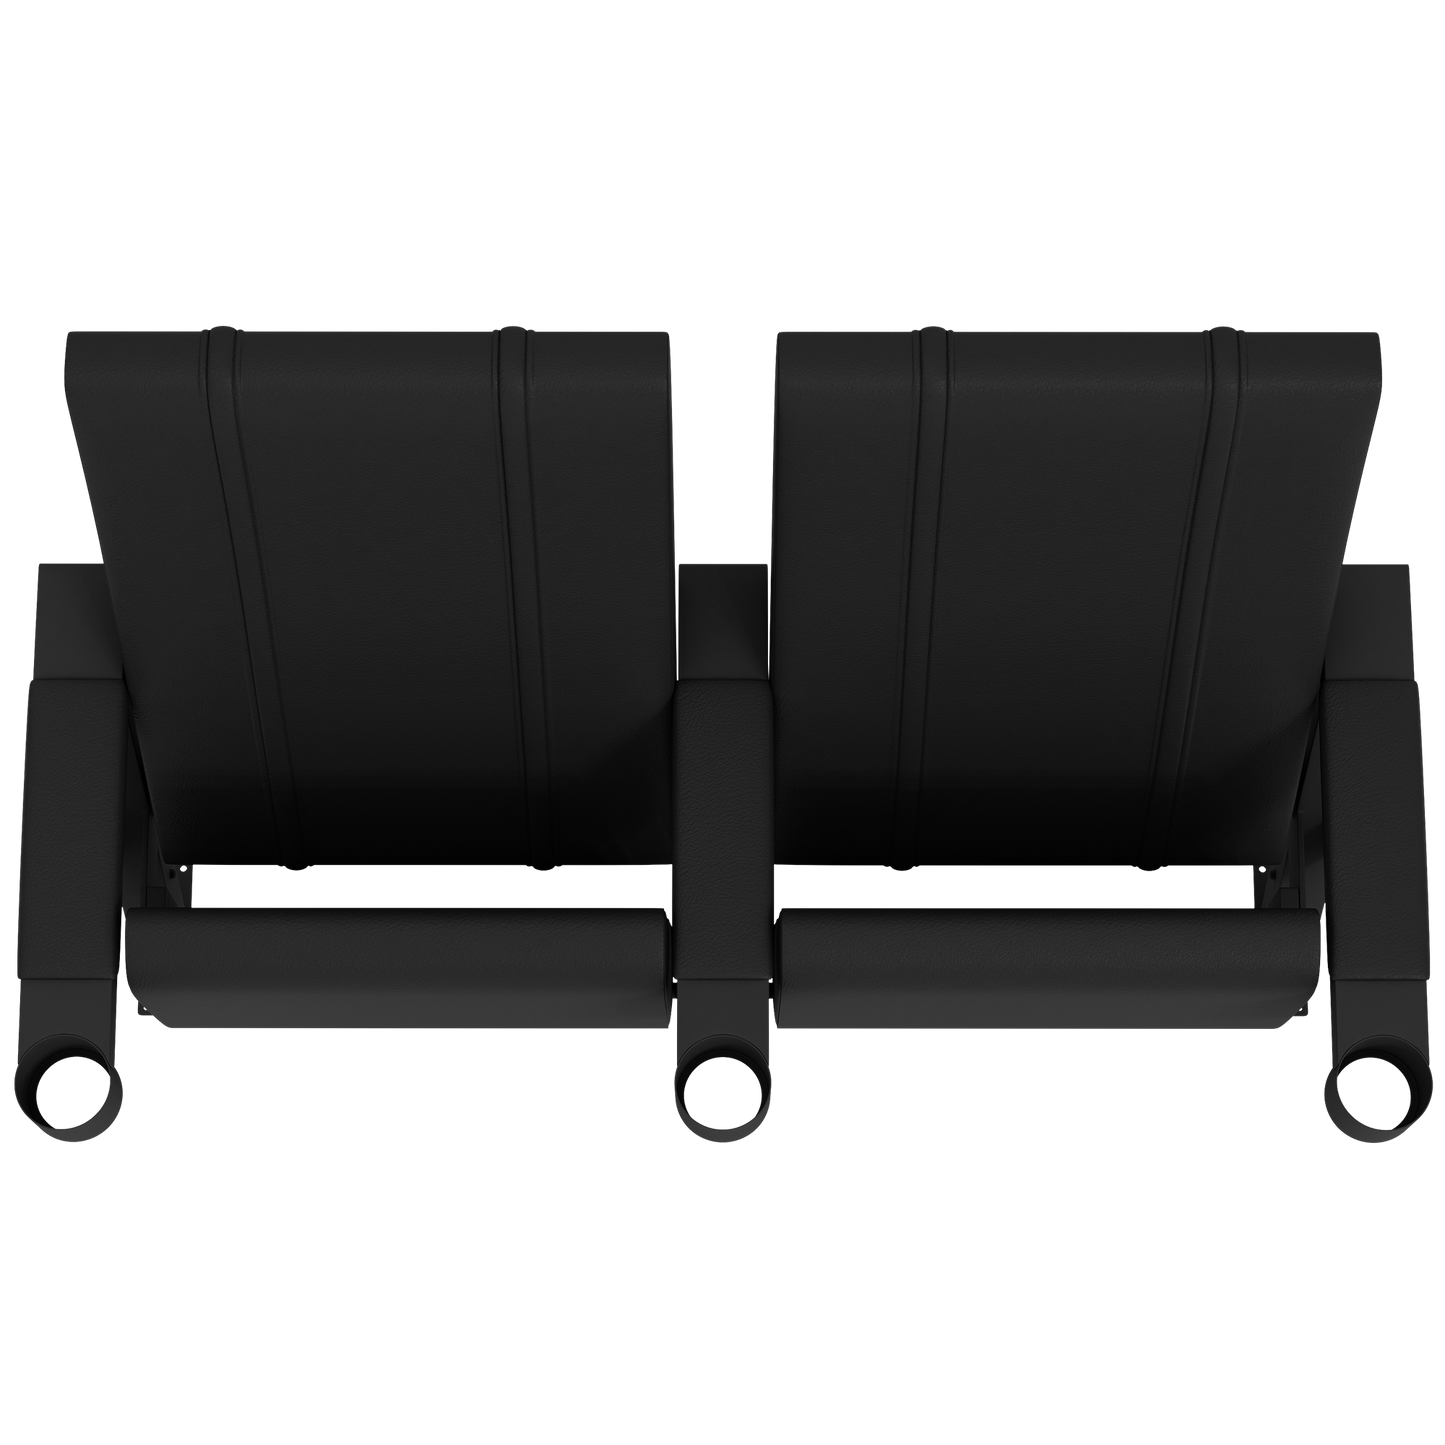 SuiteMax 3.5 VIP Seats with Chicago Bulls Logo